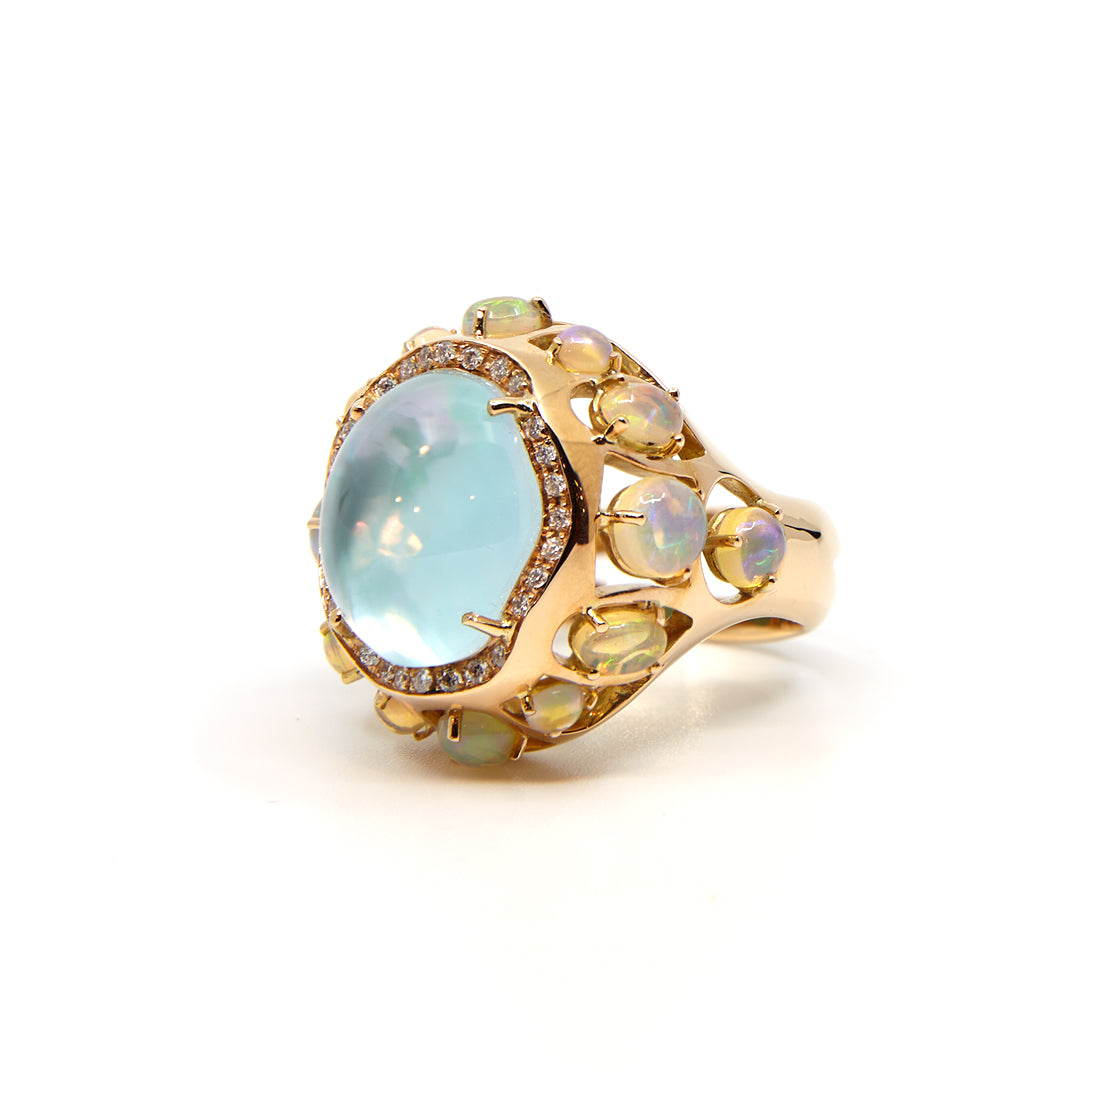 Rose gold ring with an Ethiopian opal, mother of pearl, diamond and turquoise